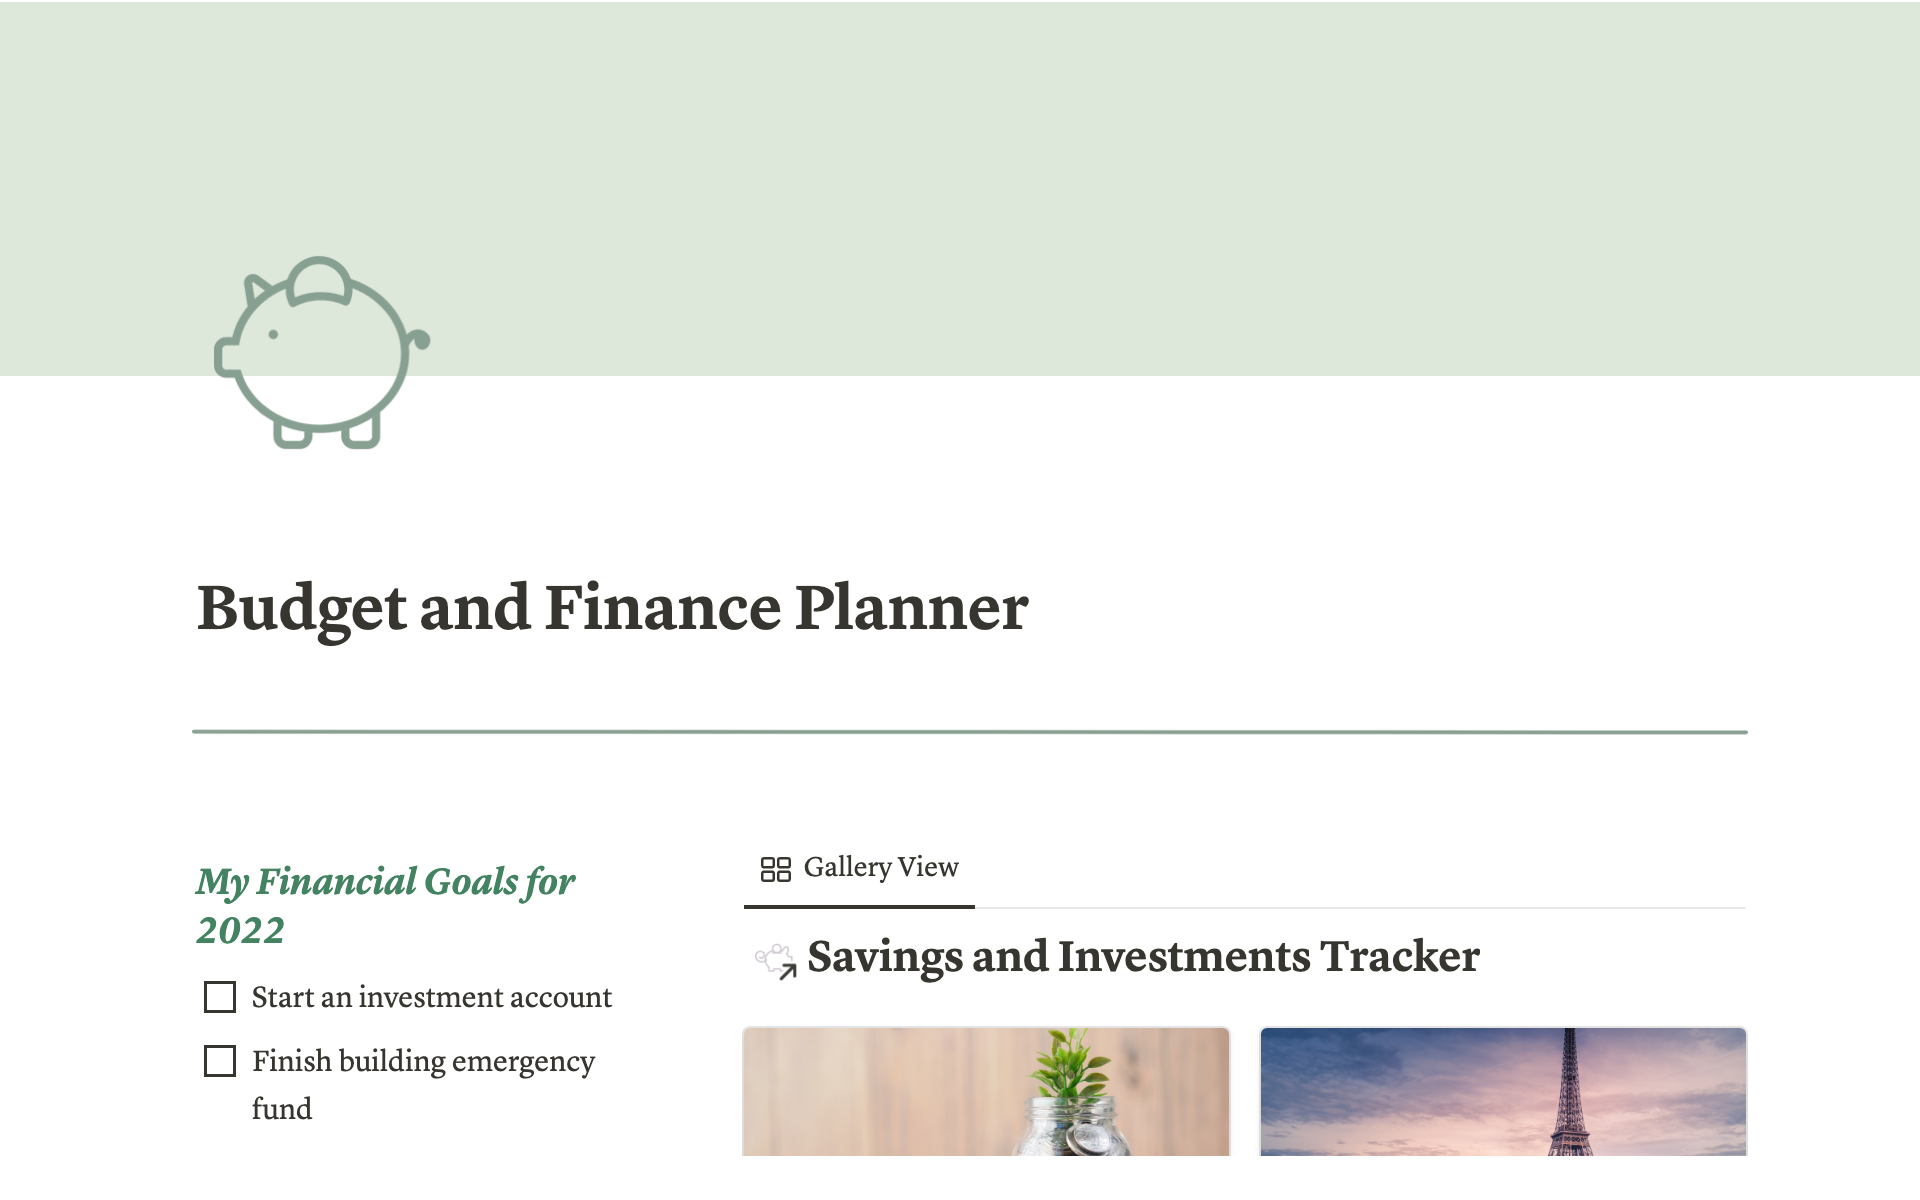 Manage and control where your money goes with this fully automated budget and finance planner.